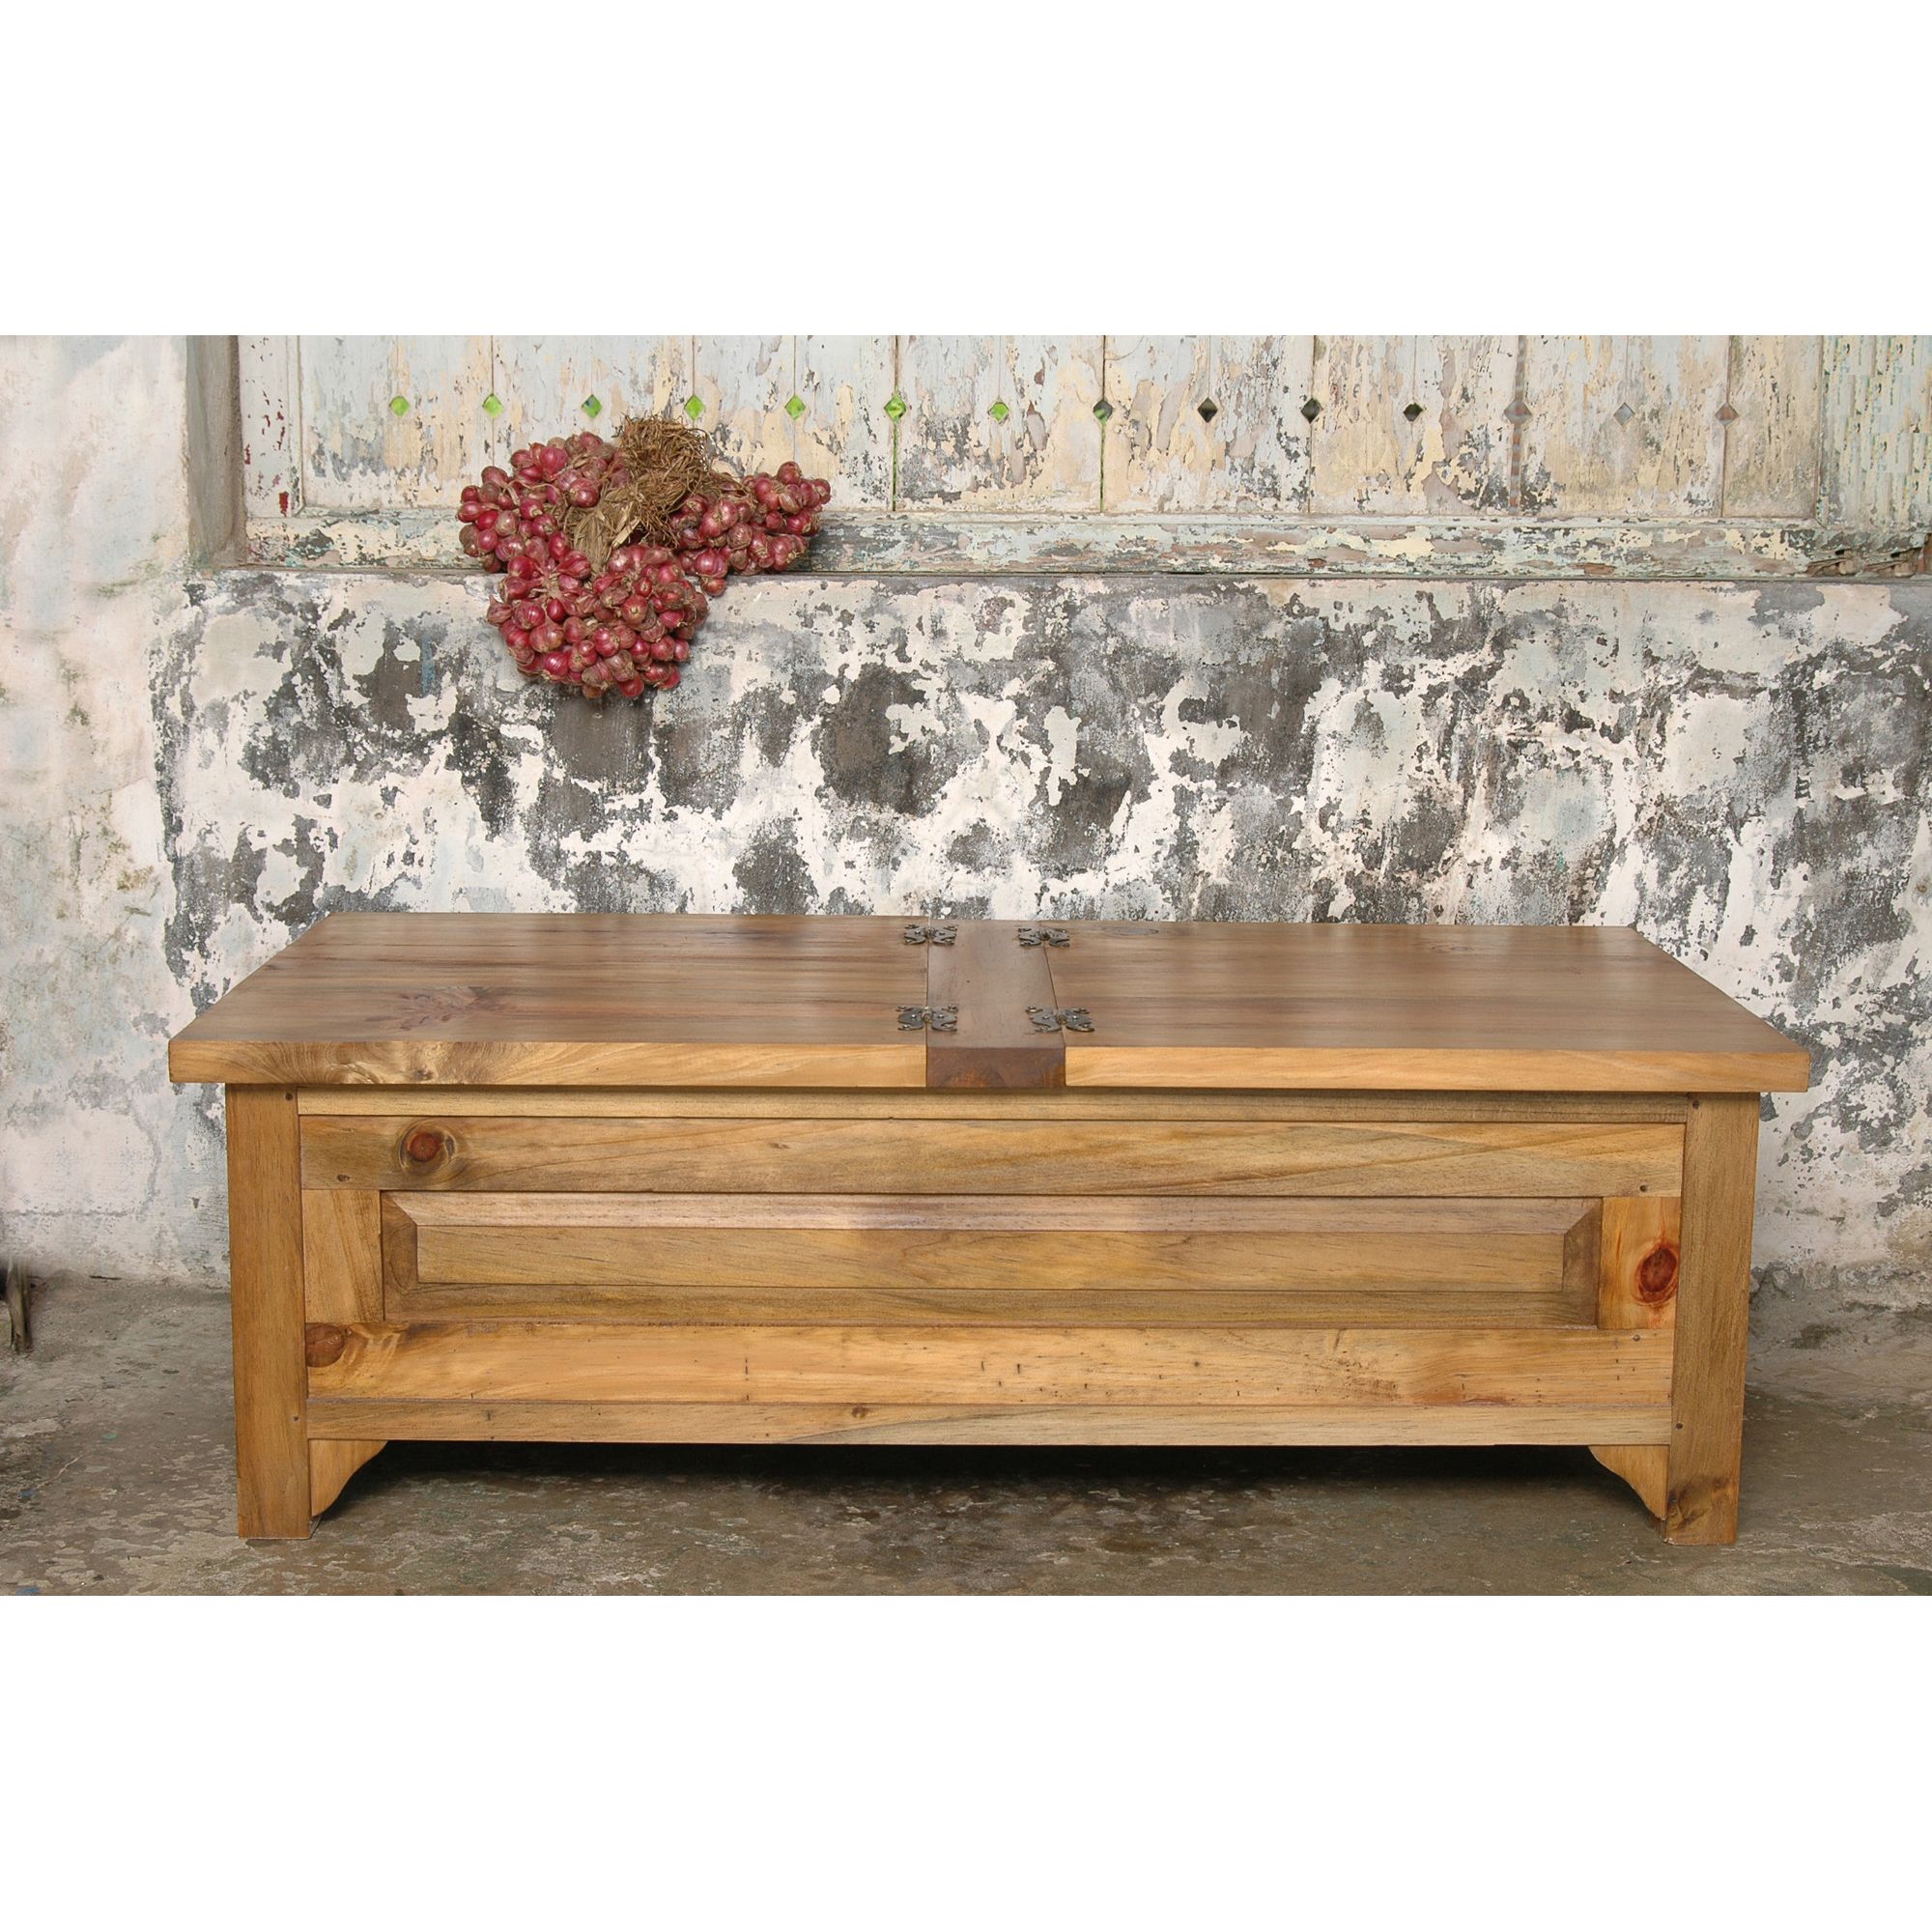 Oceans Apart Fox River Pine Rectangle Trunk Coffee Table at Tesco Direct